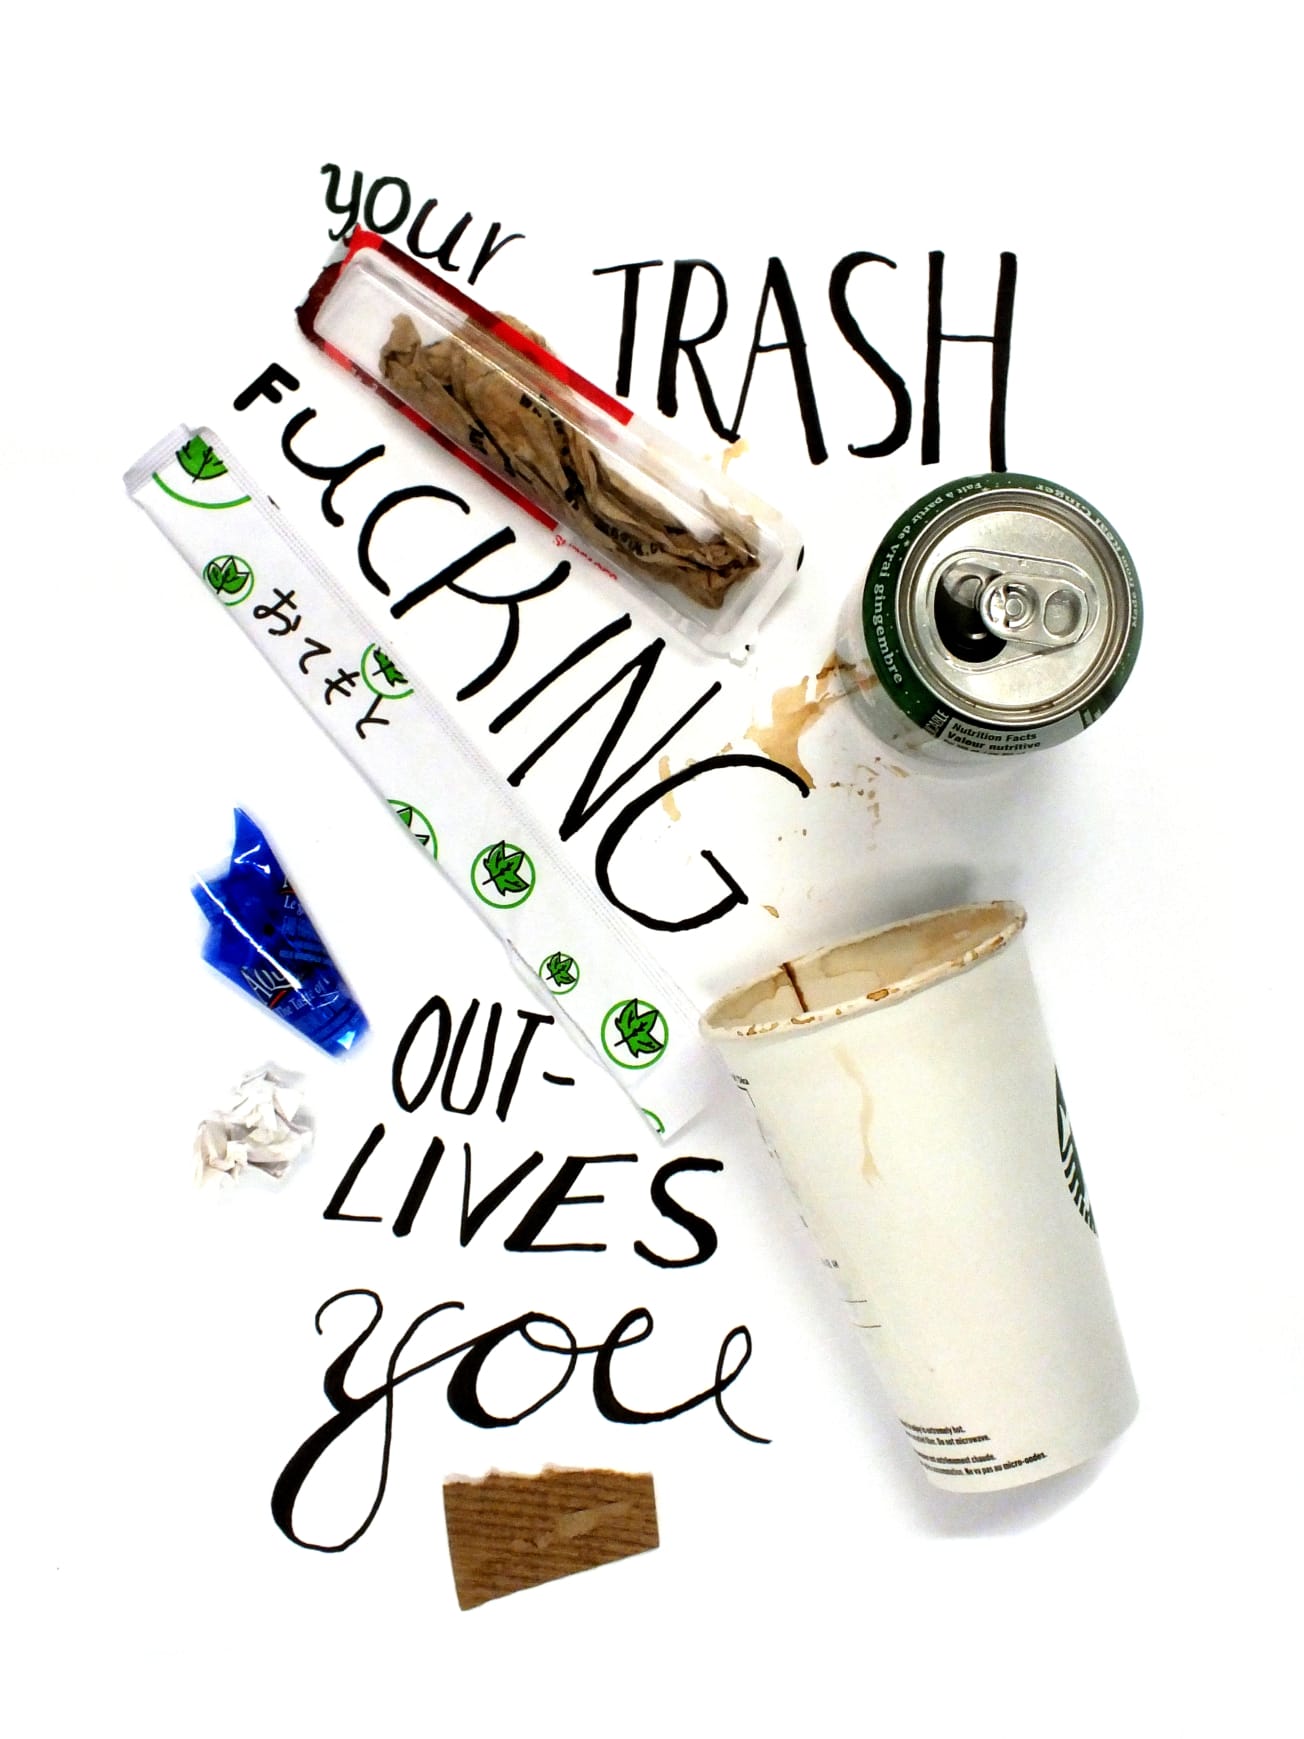 a poster. Pieces of trash are arranged. In the background there is writing, it says: Your trash fucking outlives you.